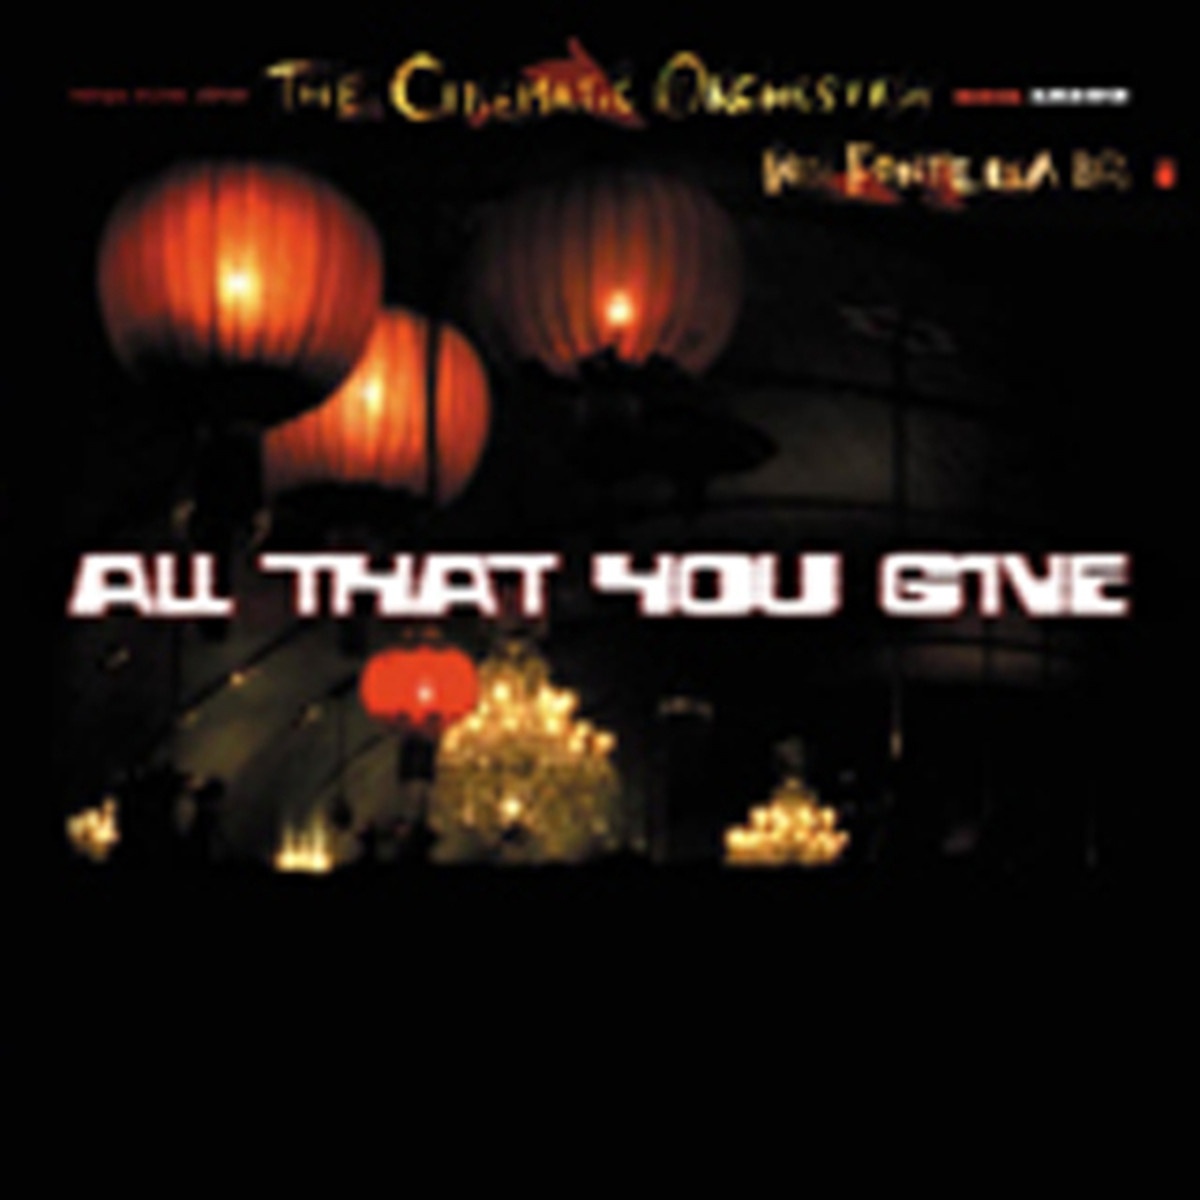 All That You Give (album version)